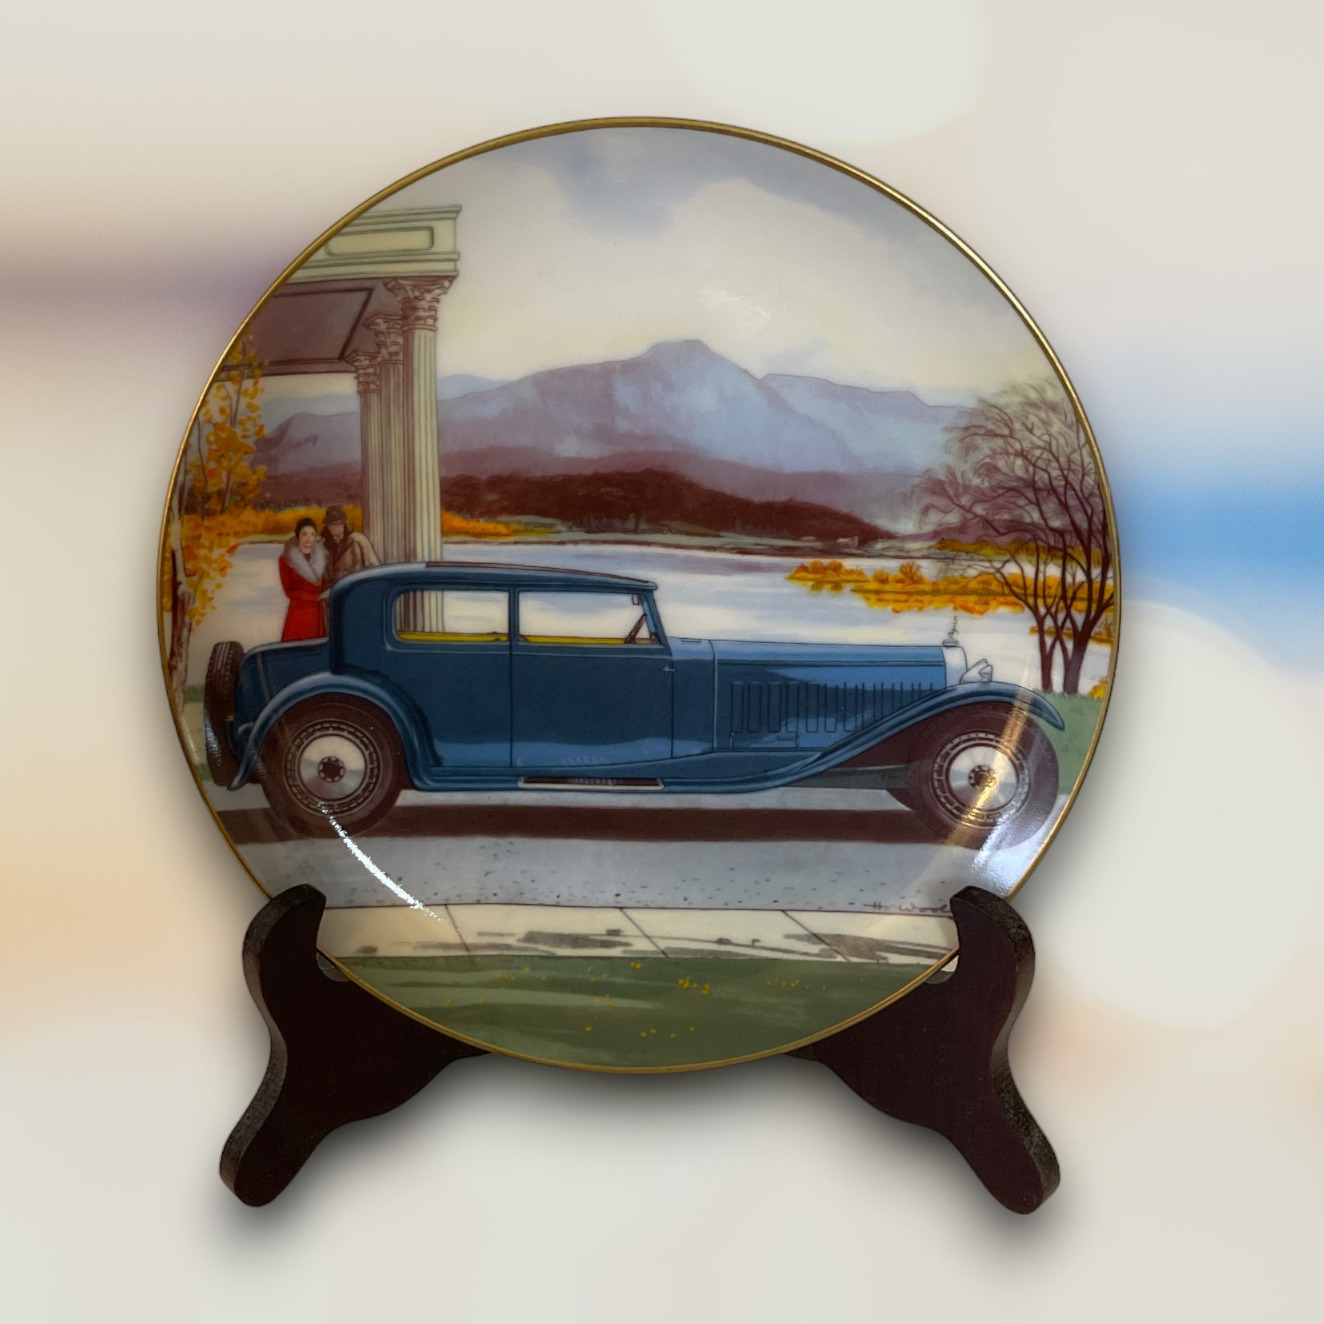 Danbury Mint 1927 Bugatti Royale Collector Plate - Hand Decorated with 22kt Gold